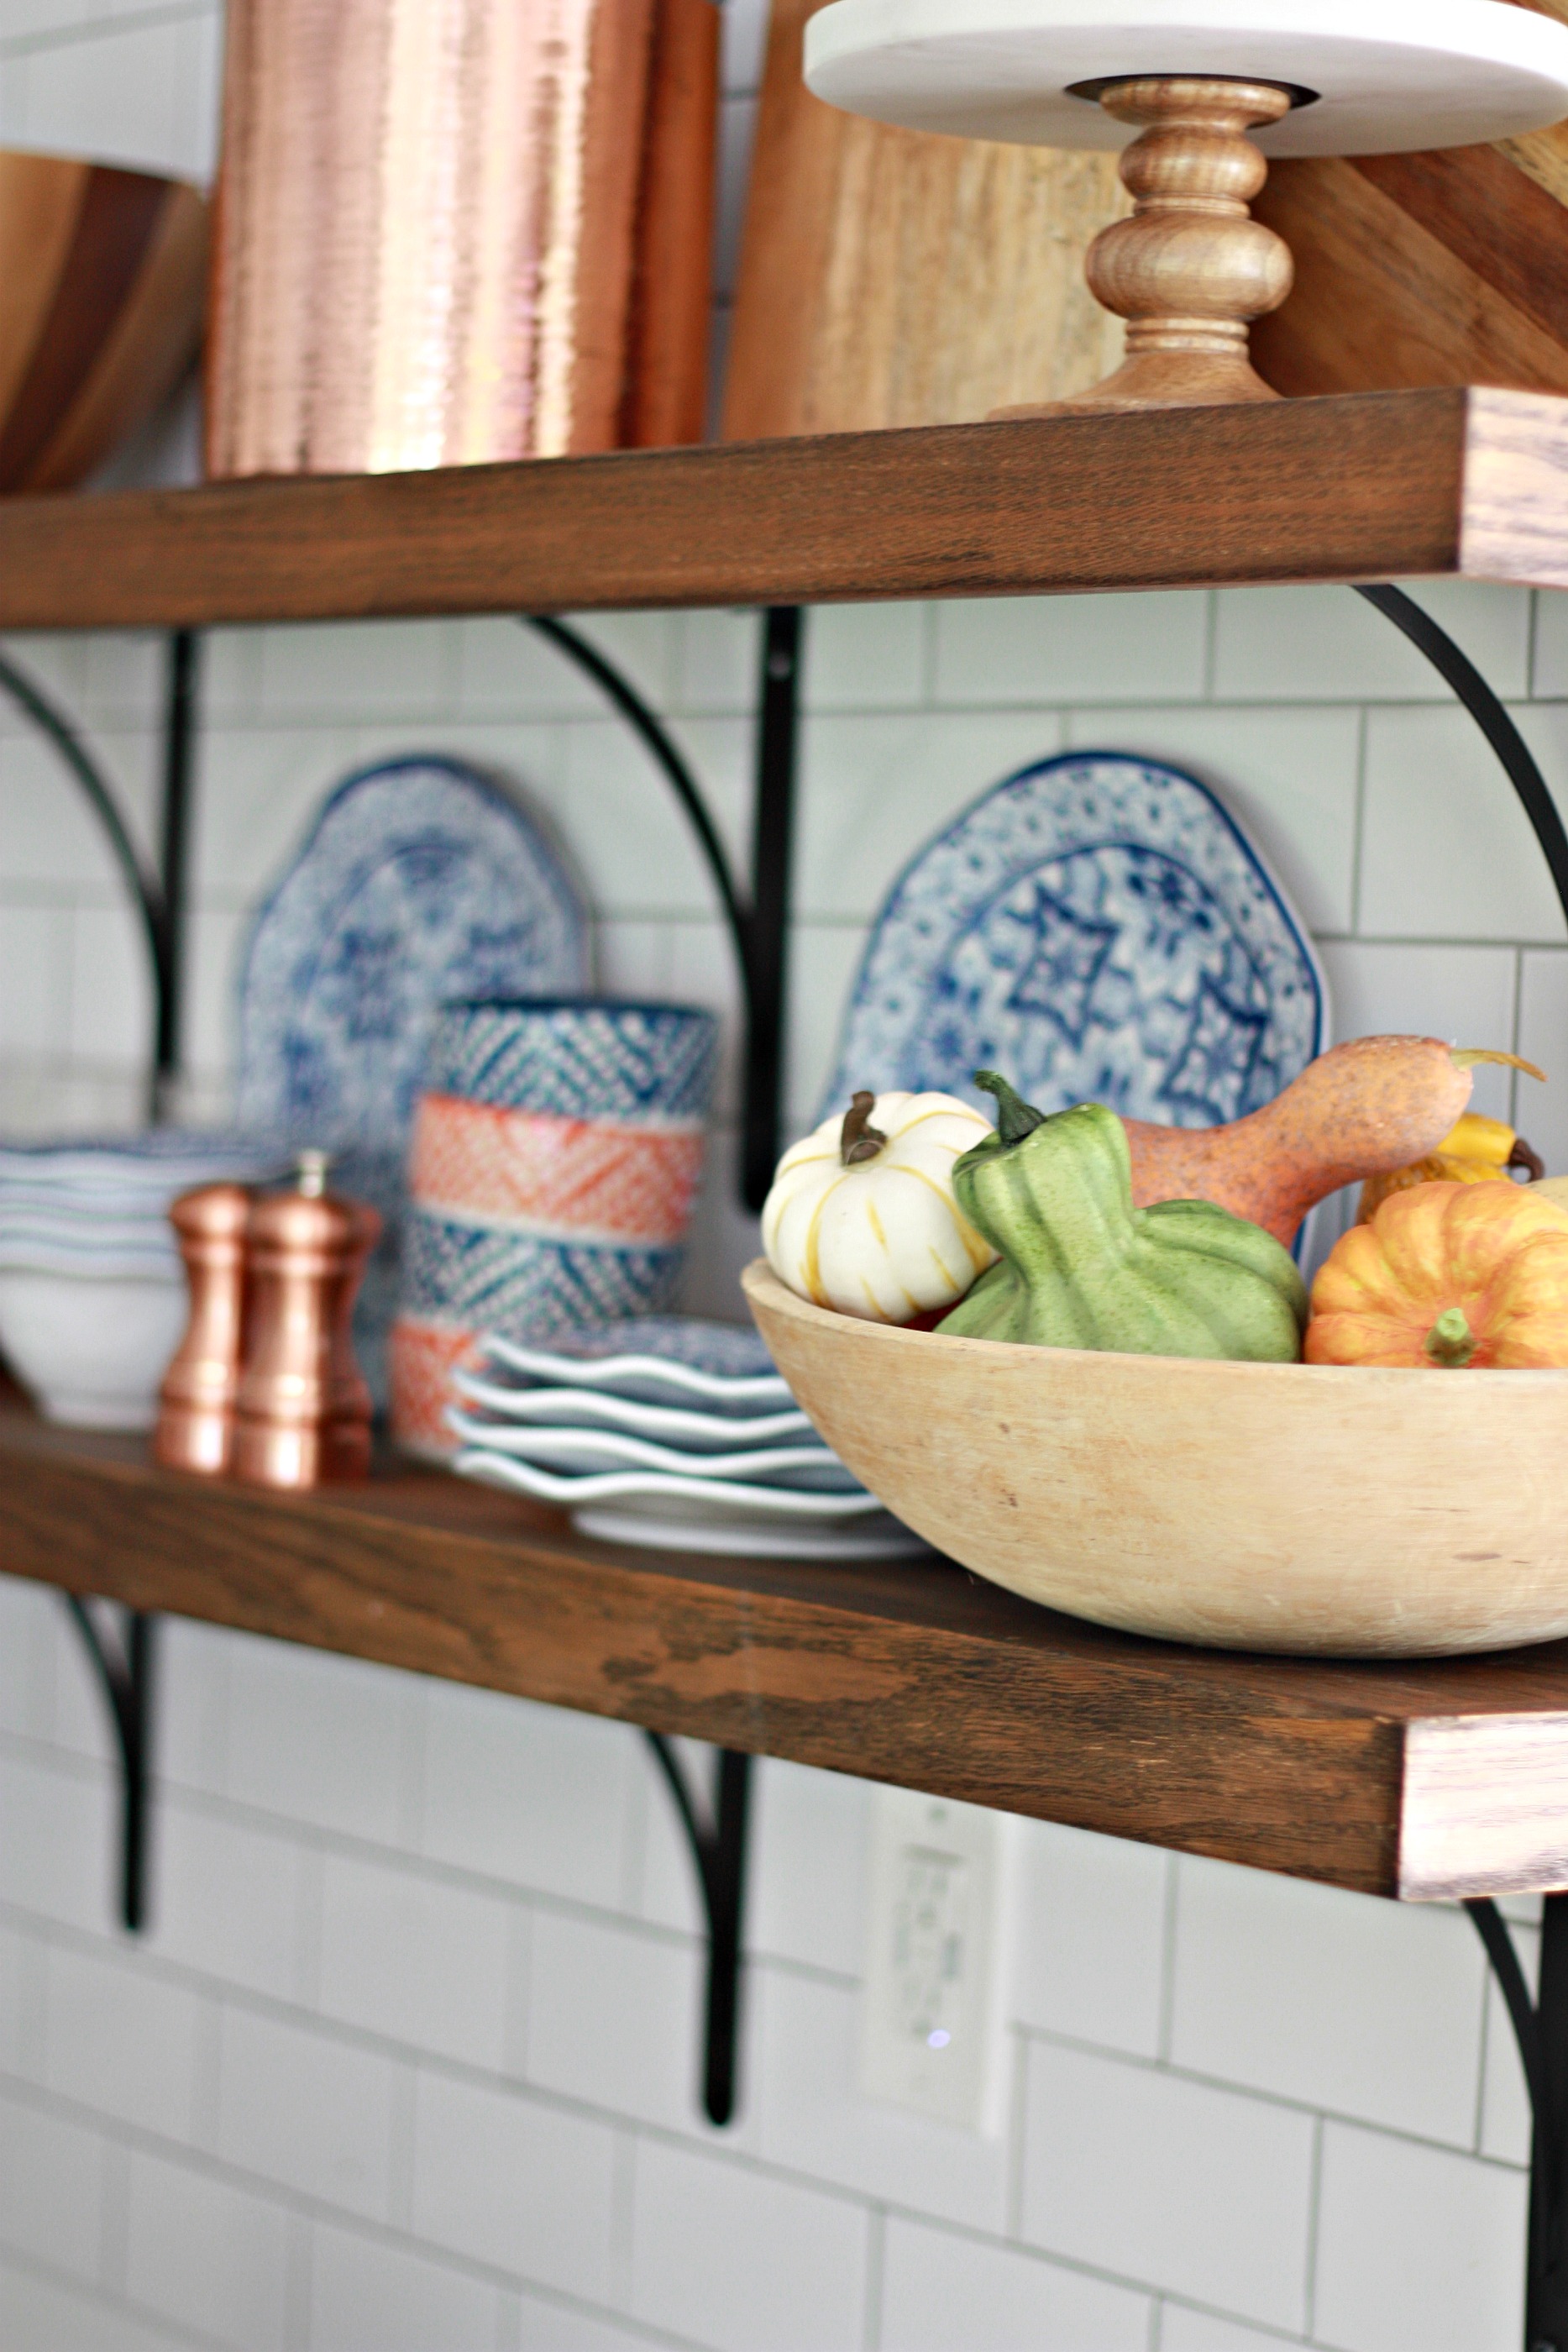 Adding Fall Decor to our Open Shelving in the Kitchen